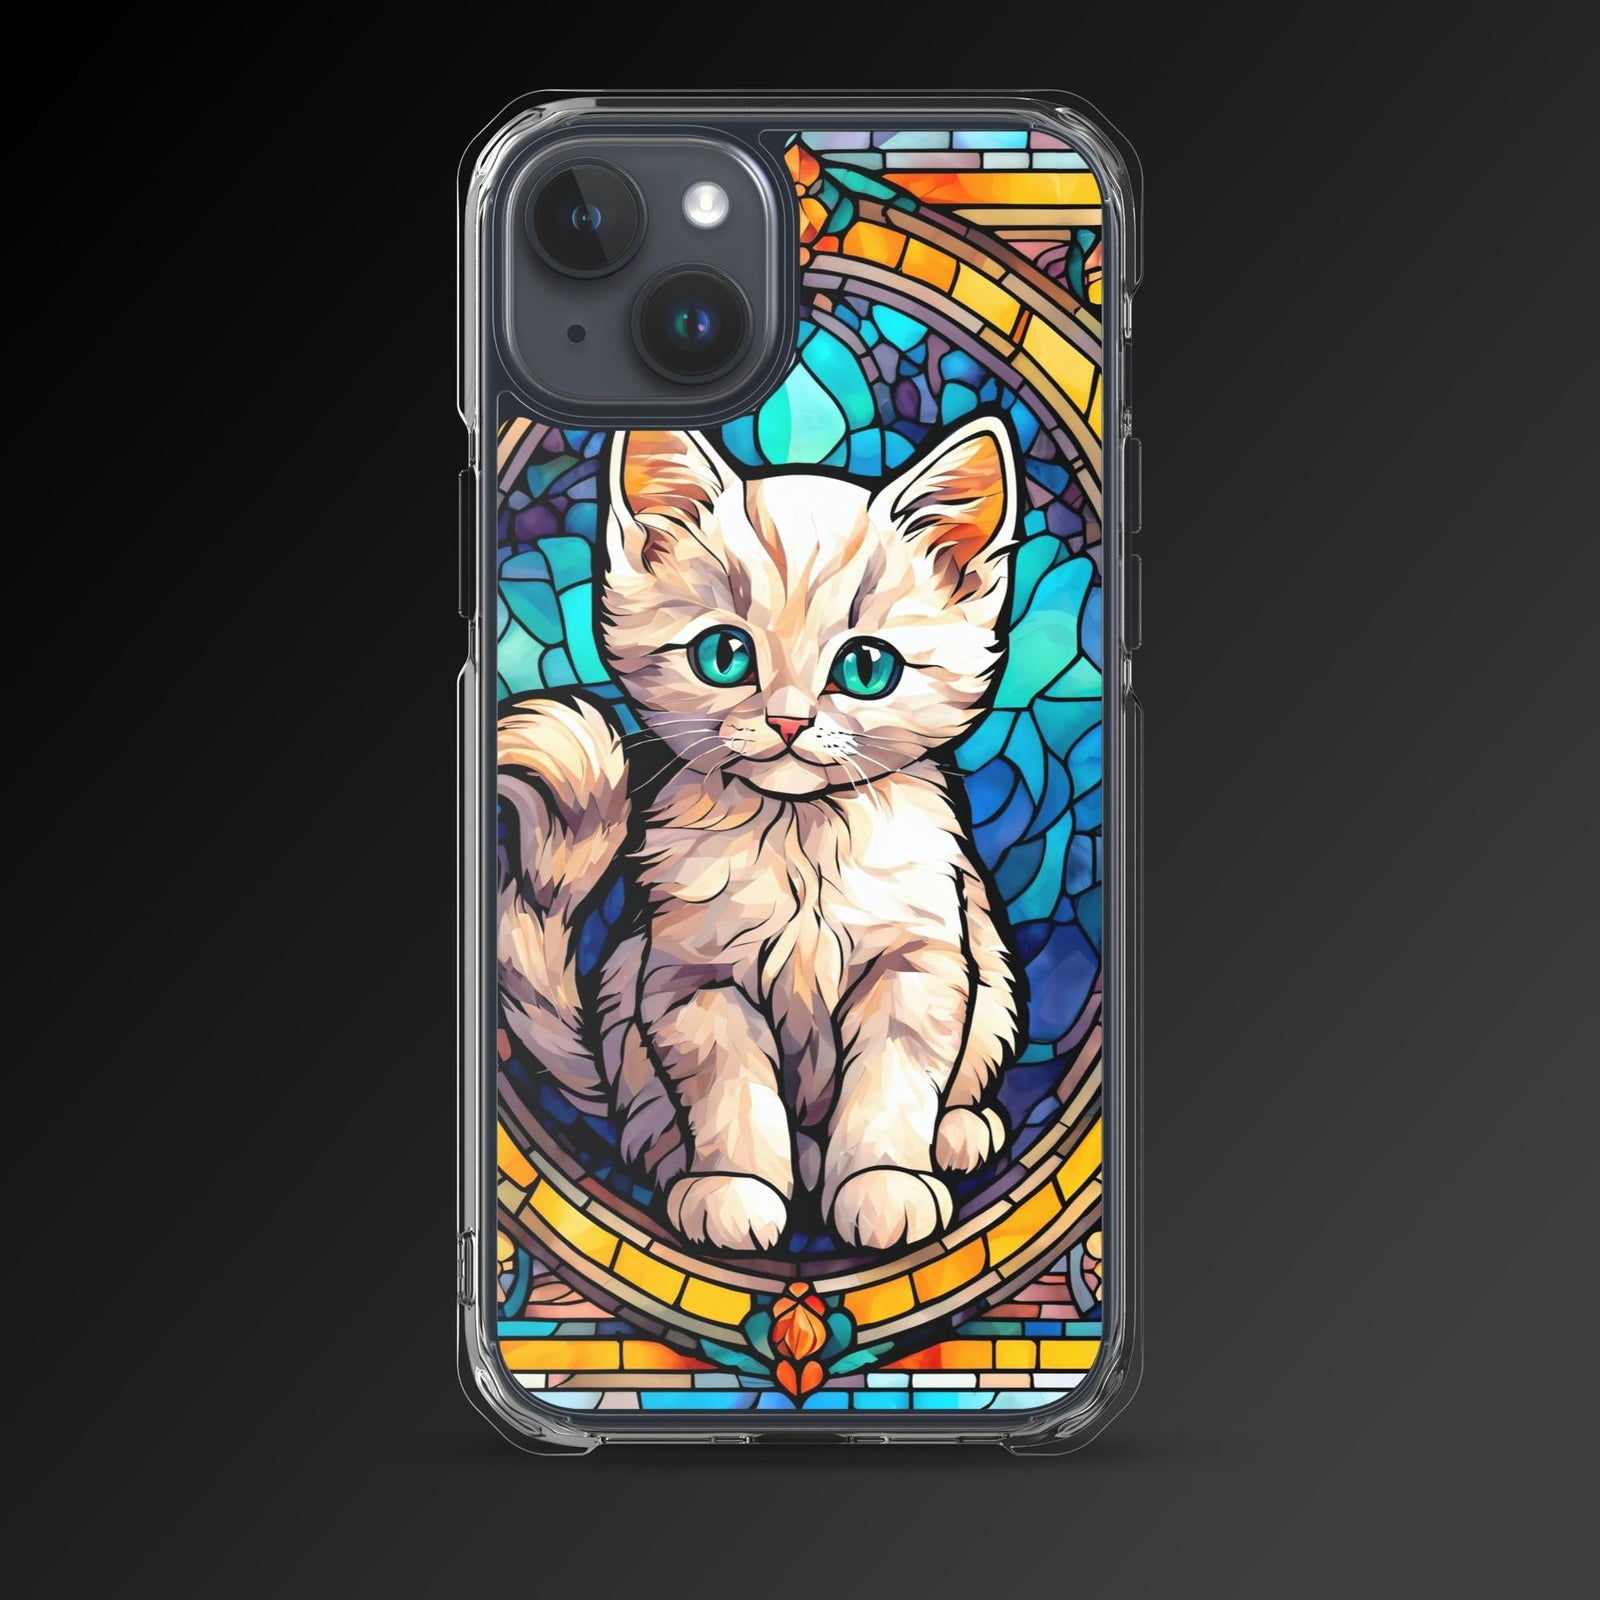 "Snow the curious kitten" clear iphone case - Clear iphone case - Ever colorful